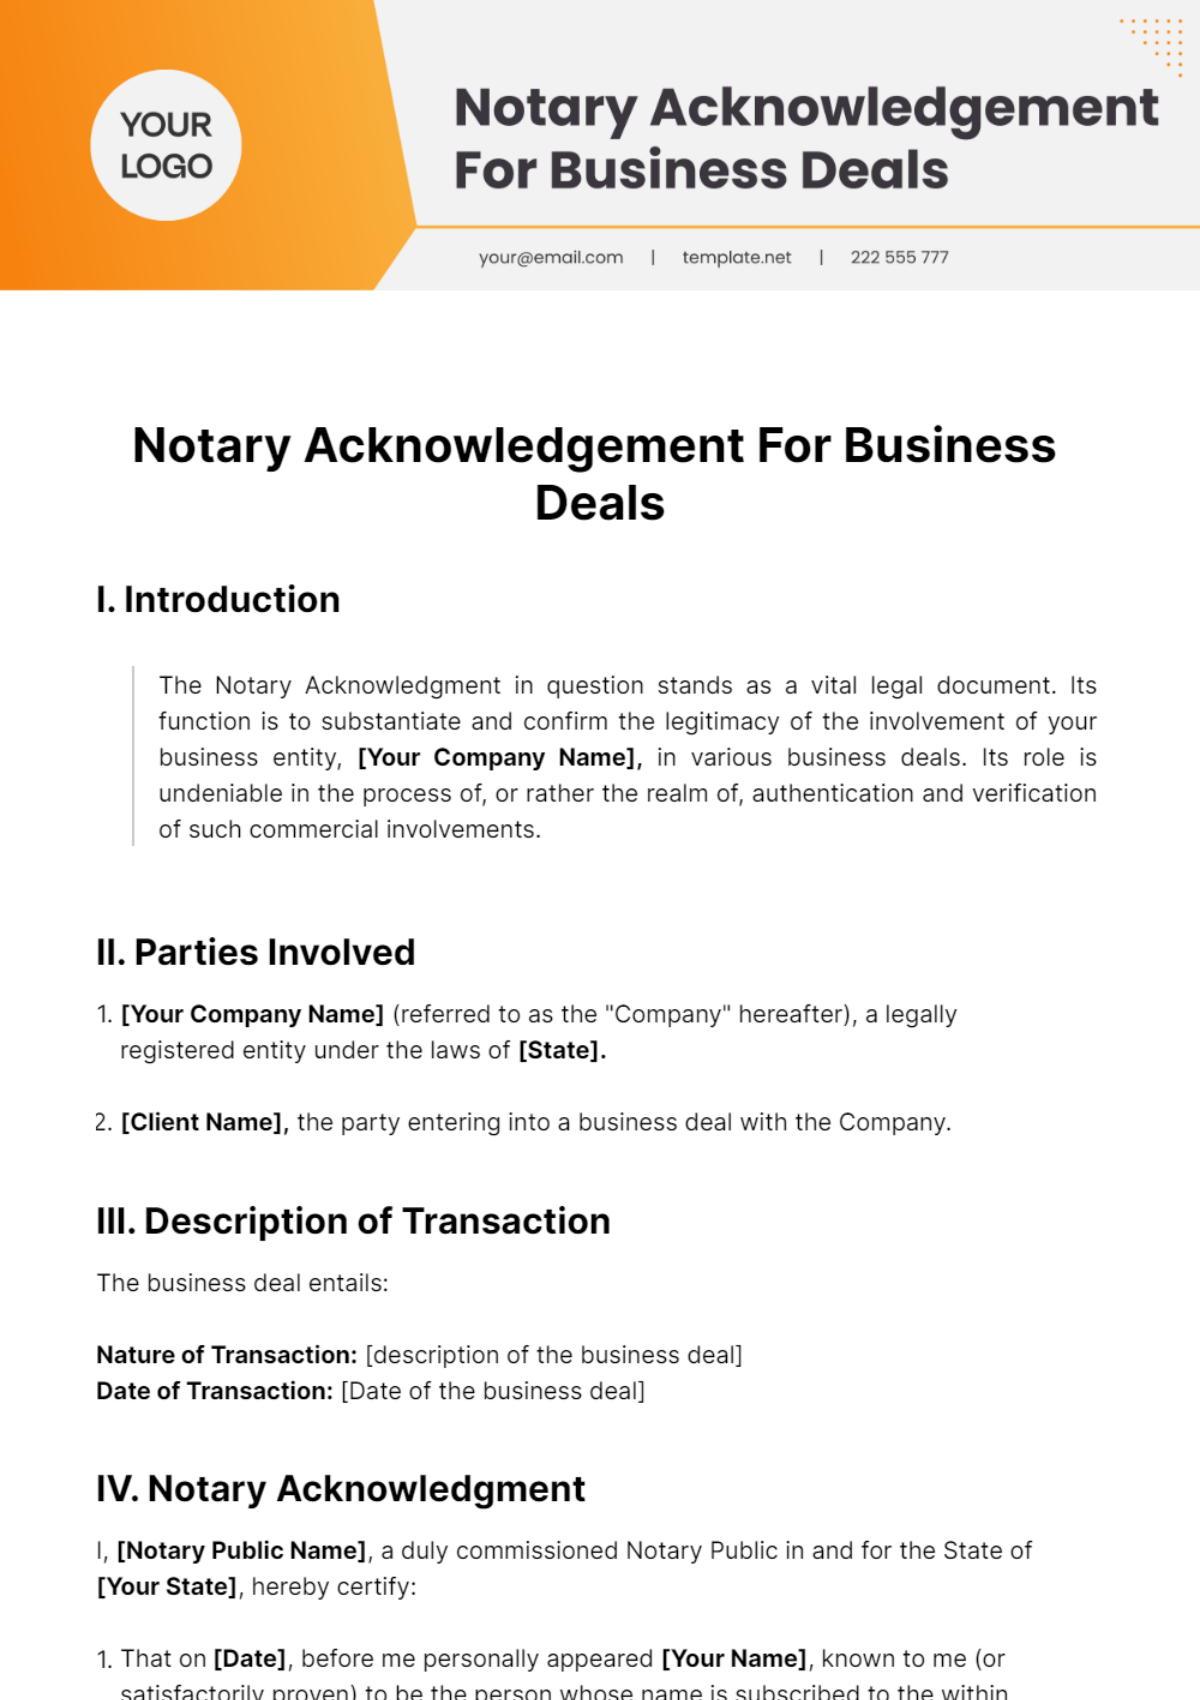 Notary Acknowledgment For Business Deals Template